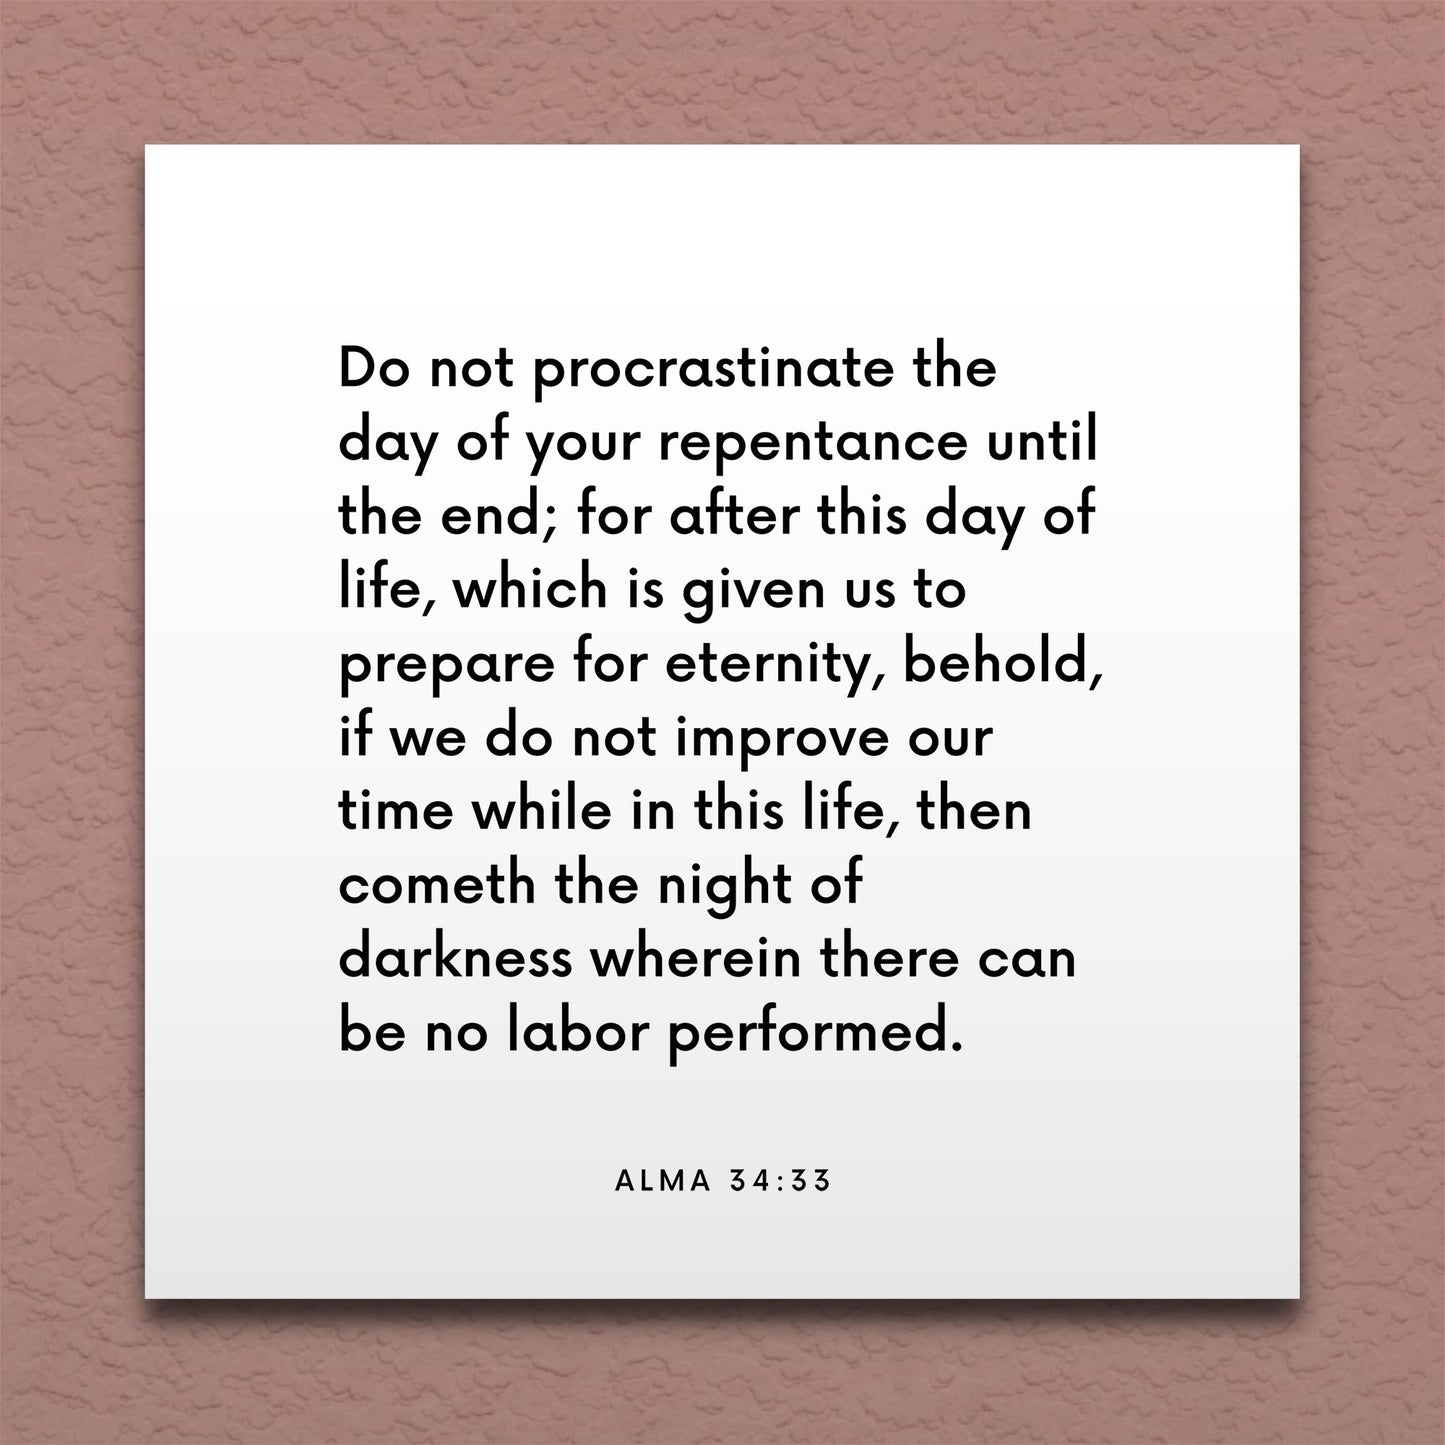 Wall-mounted scripture tile for Alma 34:33 - "Do not procrastinate the day of your repentance"